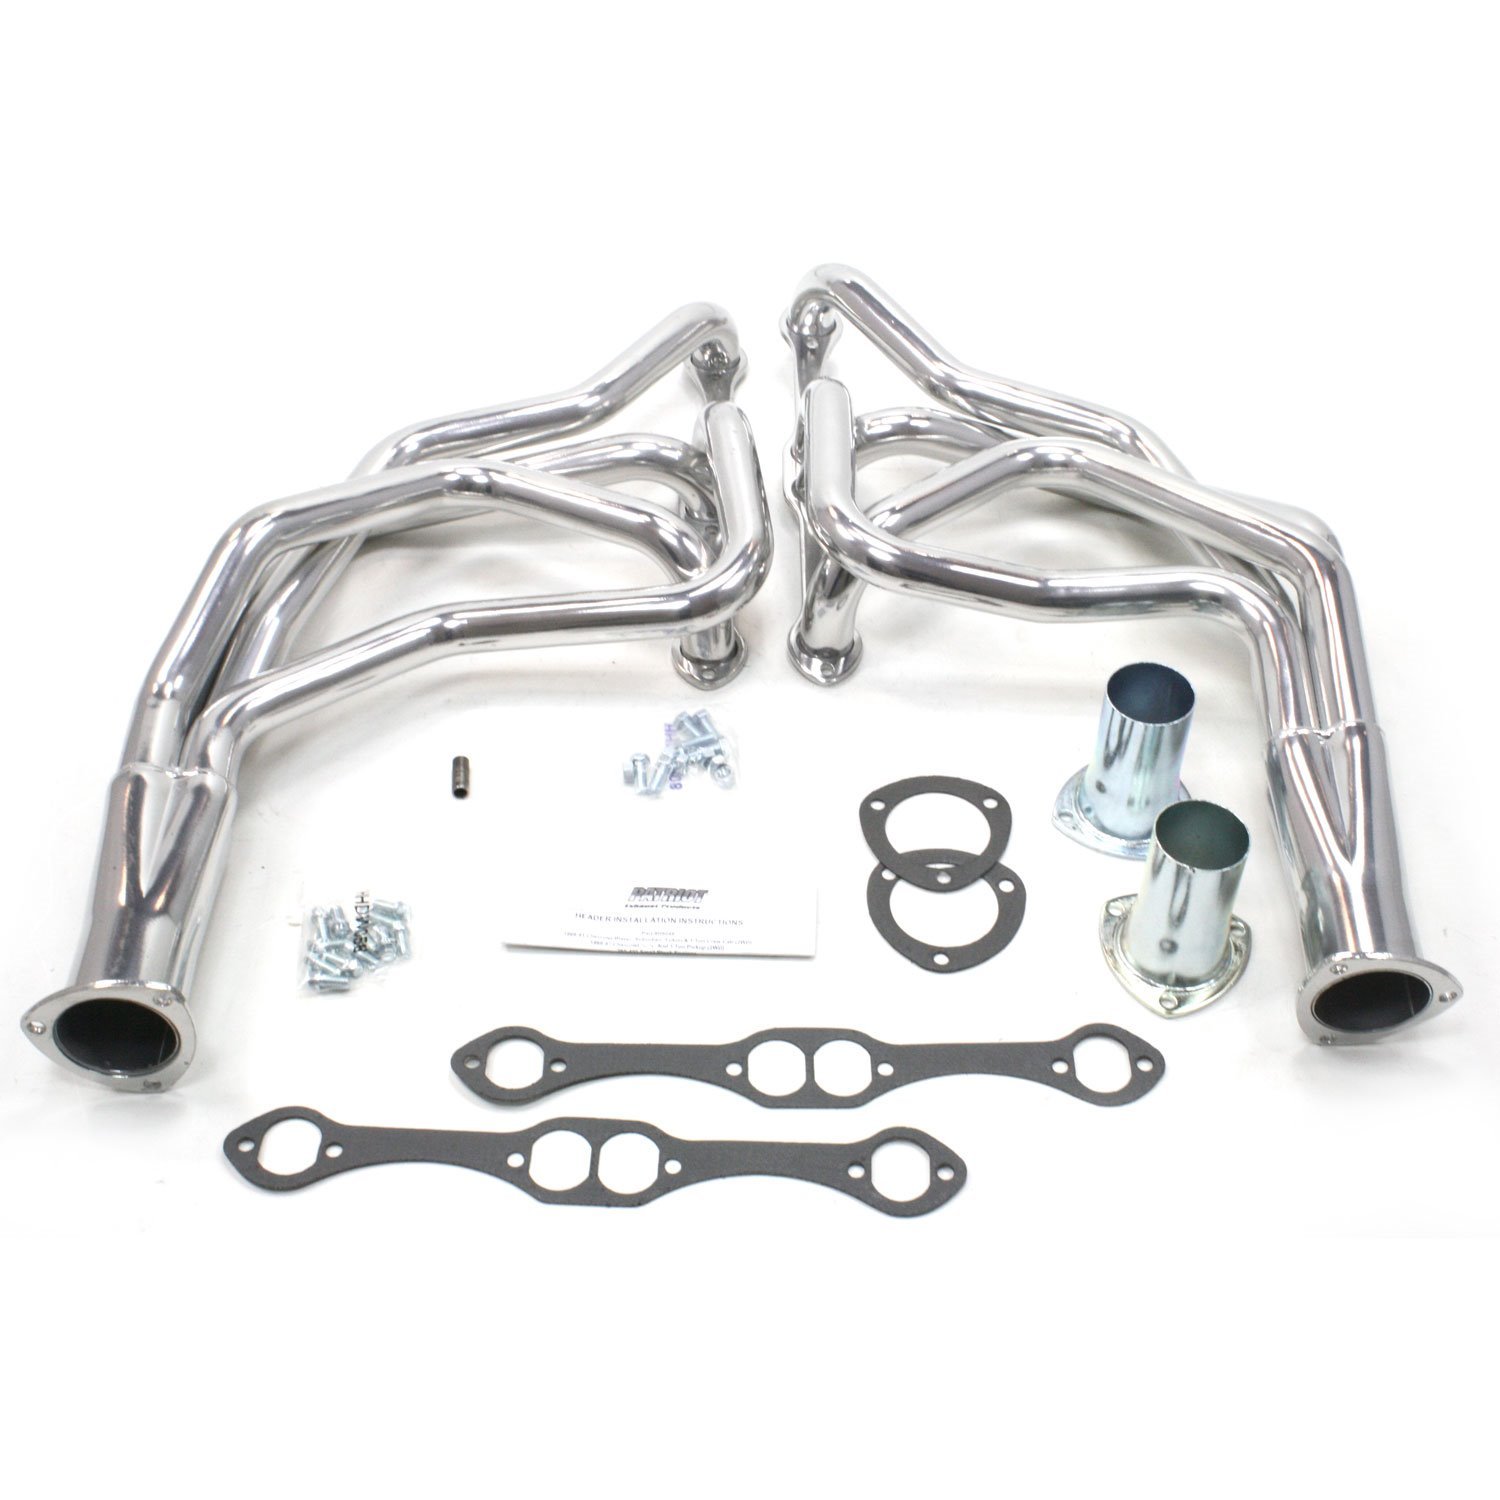 GM Specific Fit Headers 2WD Full-Size Pickup Truck and SUV